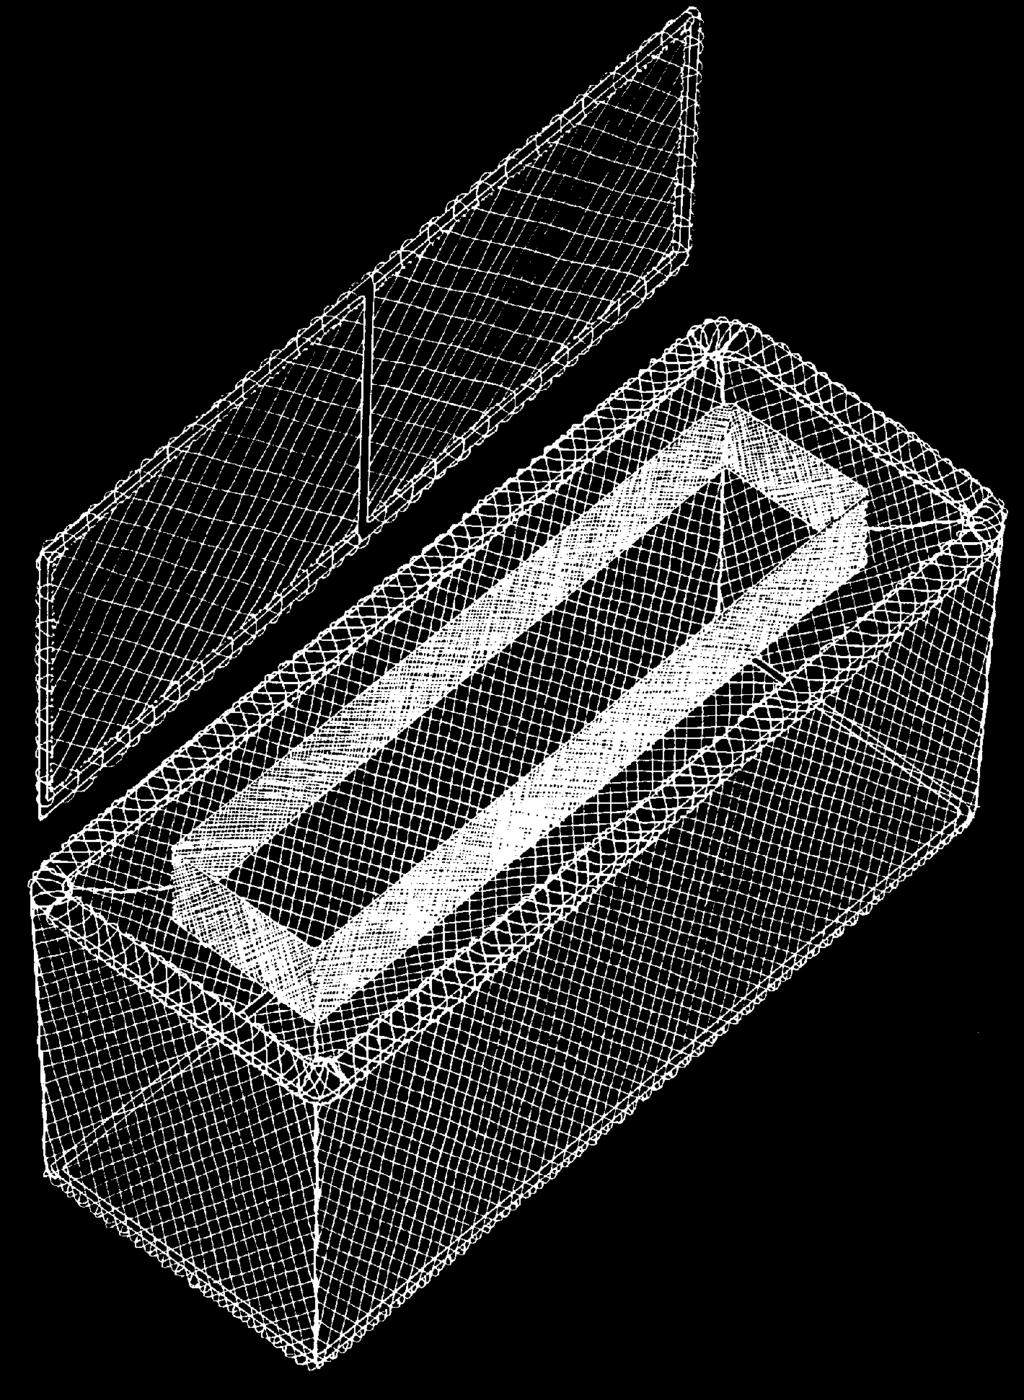 Cage Designs Components of cage design include a frame, mesh or netting, a feed ring (to keep feed in cage), a lid or cover (to exclude animal and human predators), and some type of flotation device.